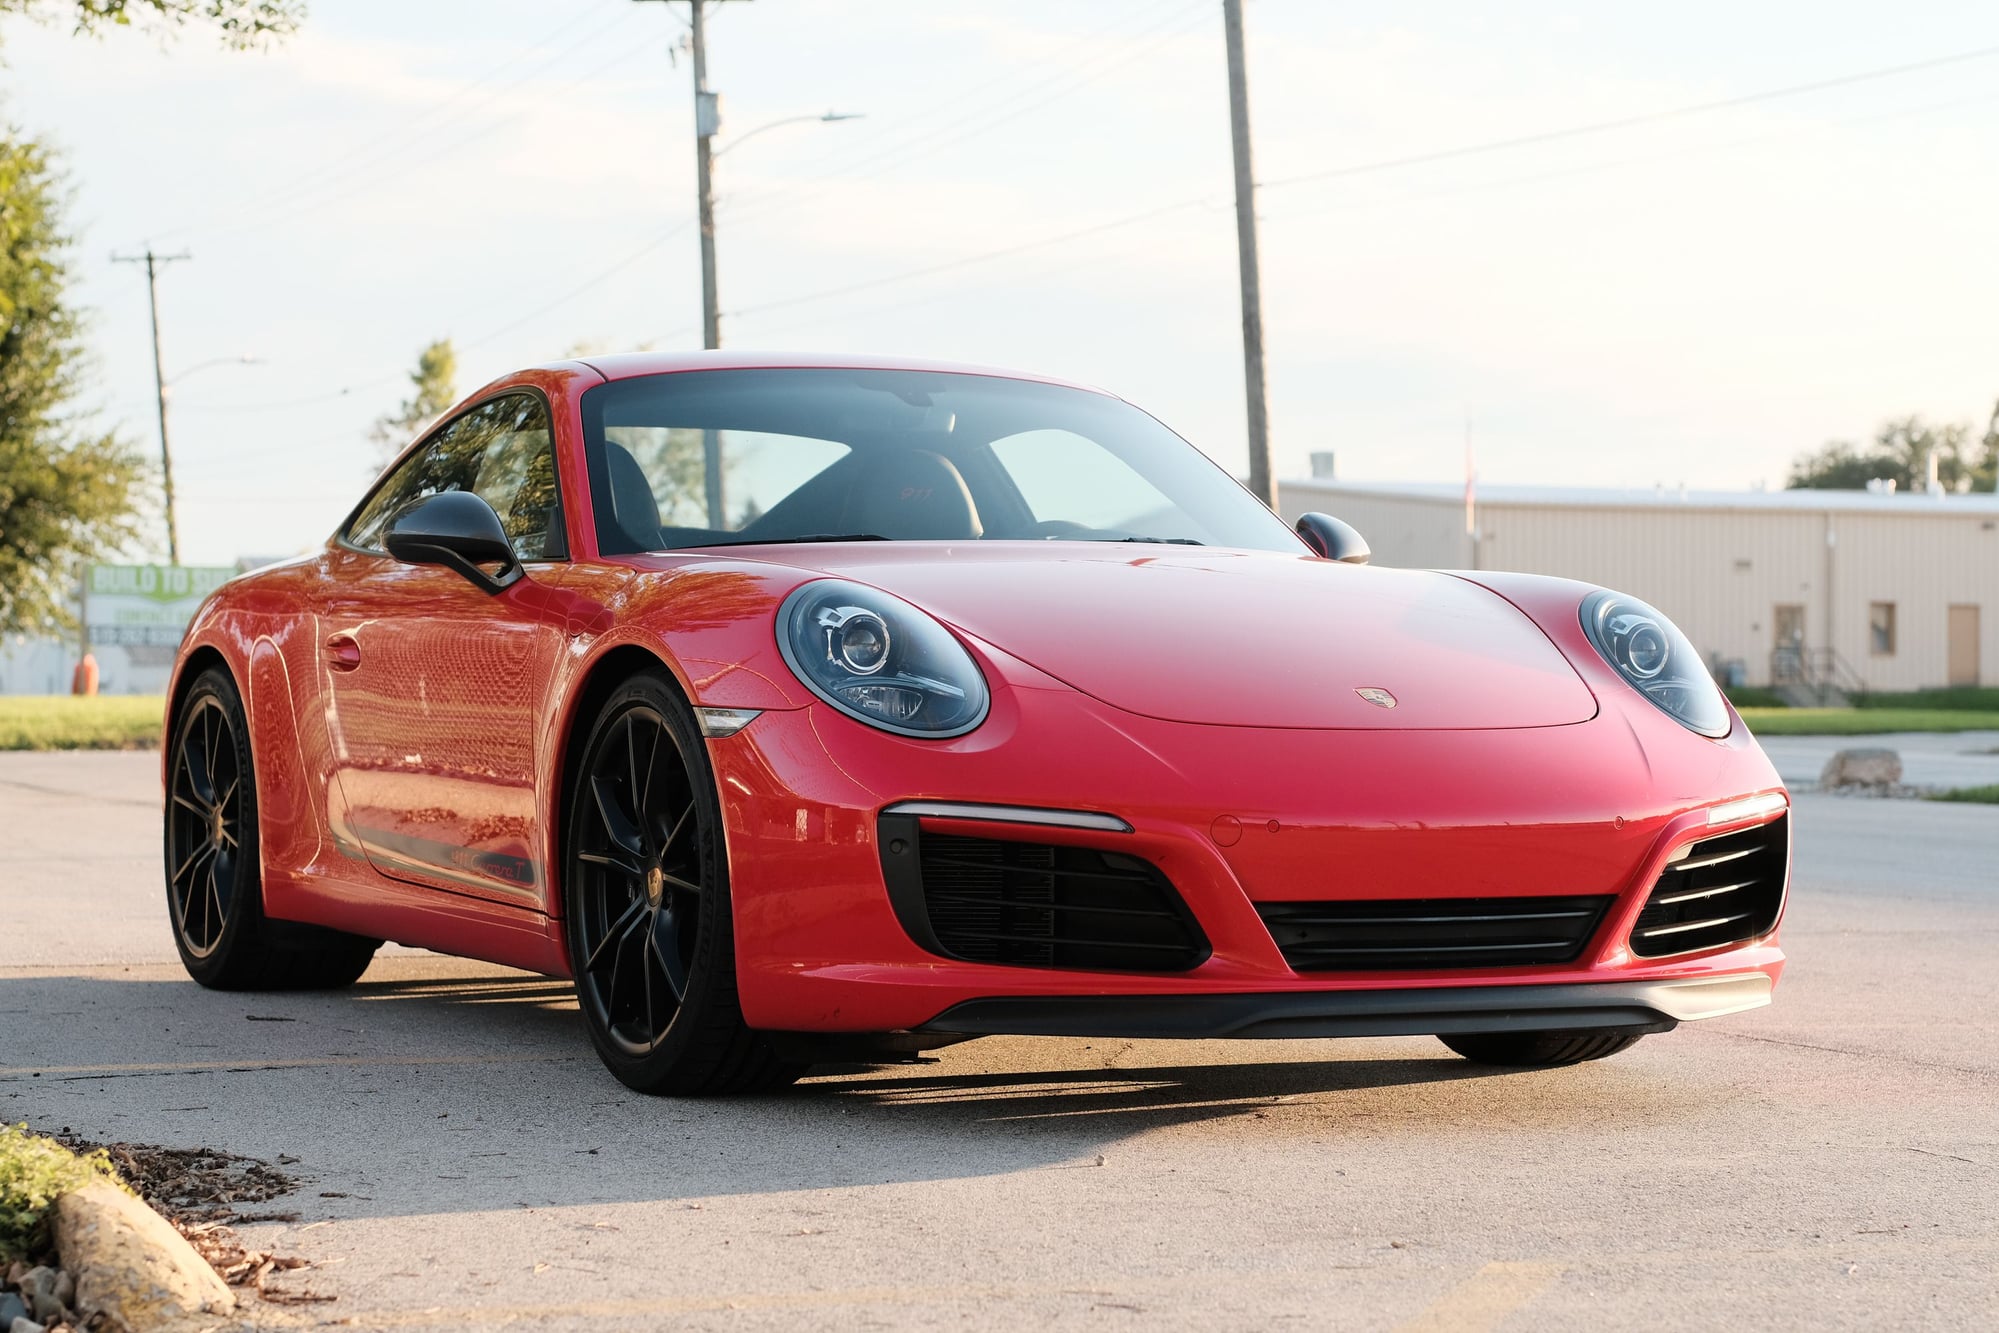 2018 Porsche 911 - FS: 2018 911 Carrera T - GR, 7spd, LWB, RAS, T int, Bose - Used - VIN WP0AA2A98JS106390 - 8,075 Miles - 6 cyl - 2WD - Manual - Coupe - Red - Des Moines, IA 50312, United States